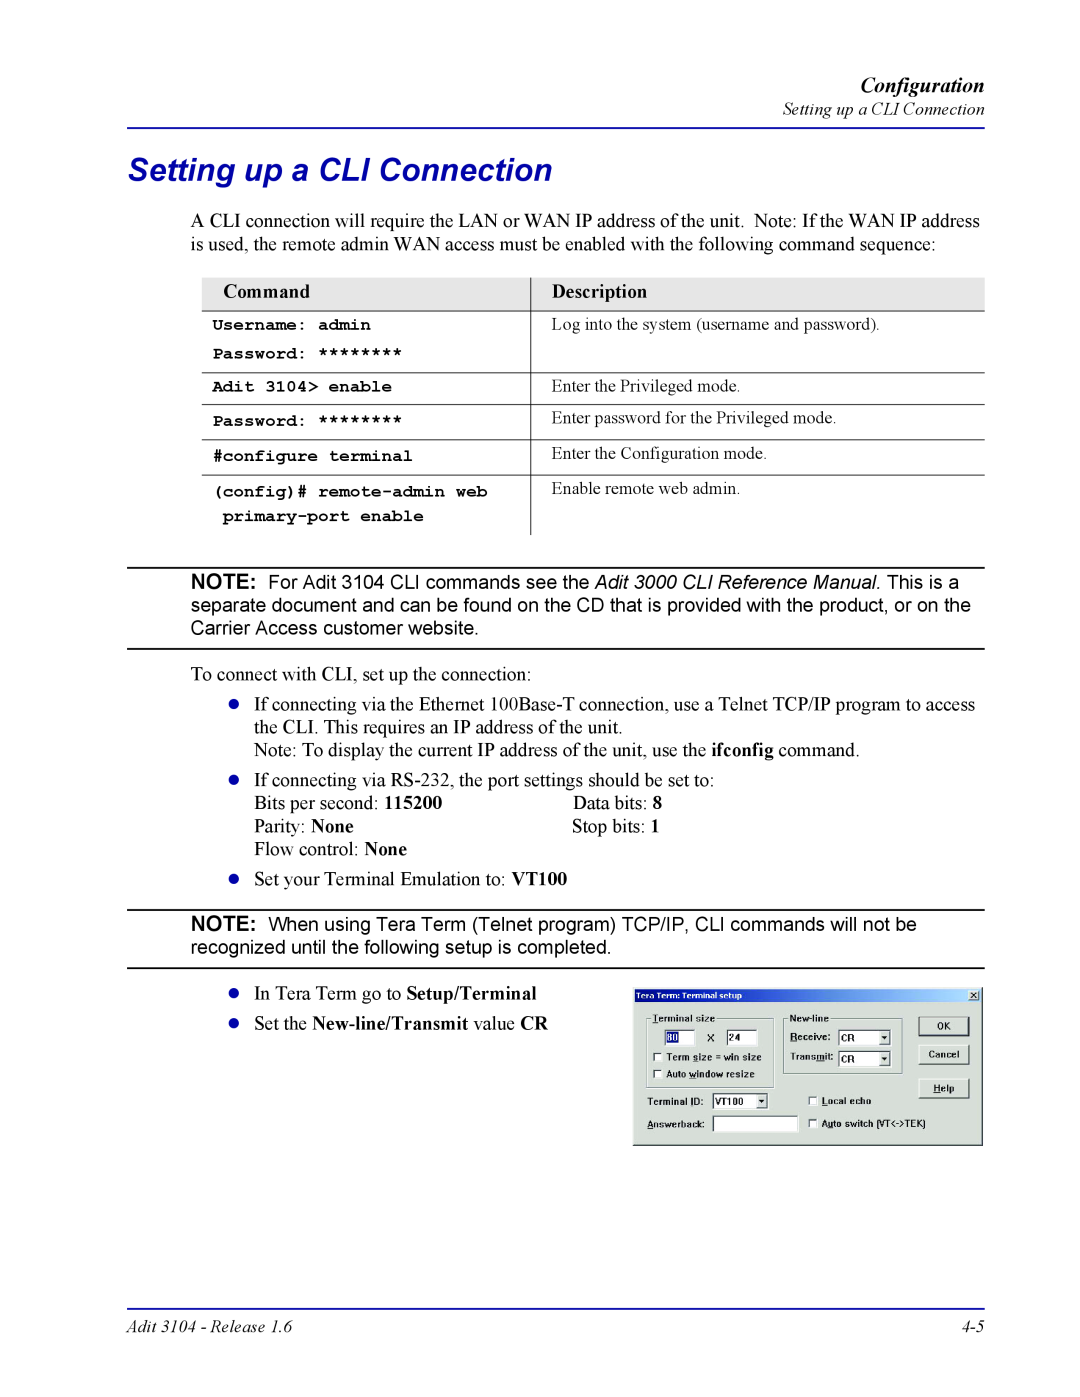 Carrier Access Adit 3104 user manual Setting up a CLI Connection, Configuration 